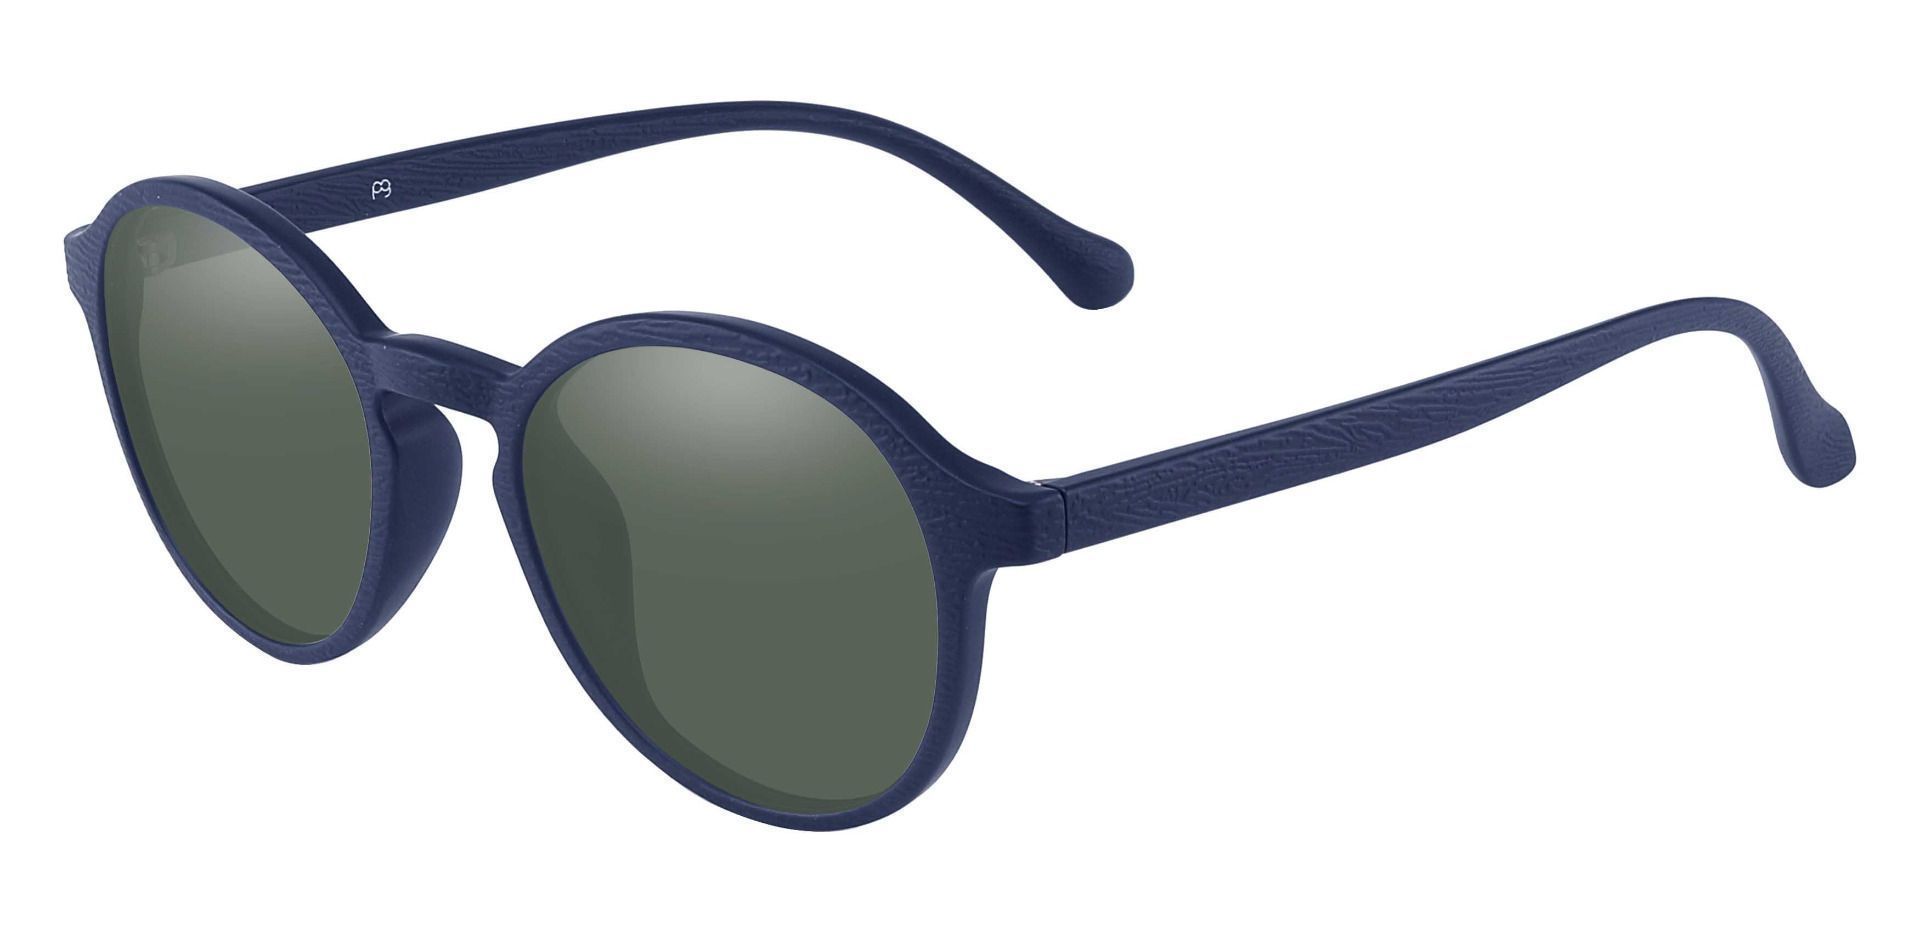 Whitney Round Lined Bifocal Sunglasses - Blue Frame With Green Lenses